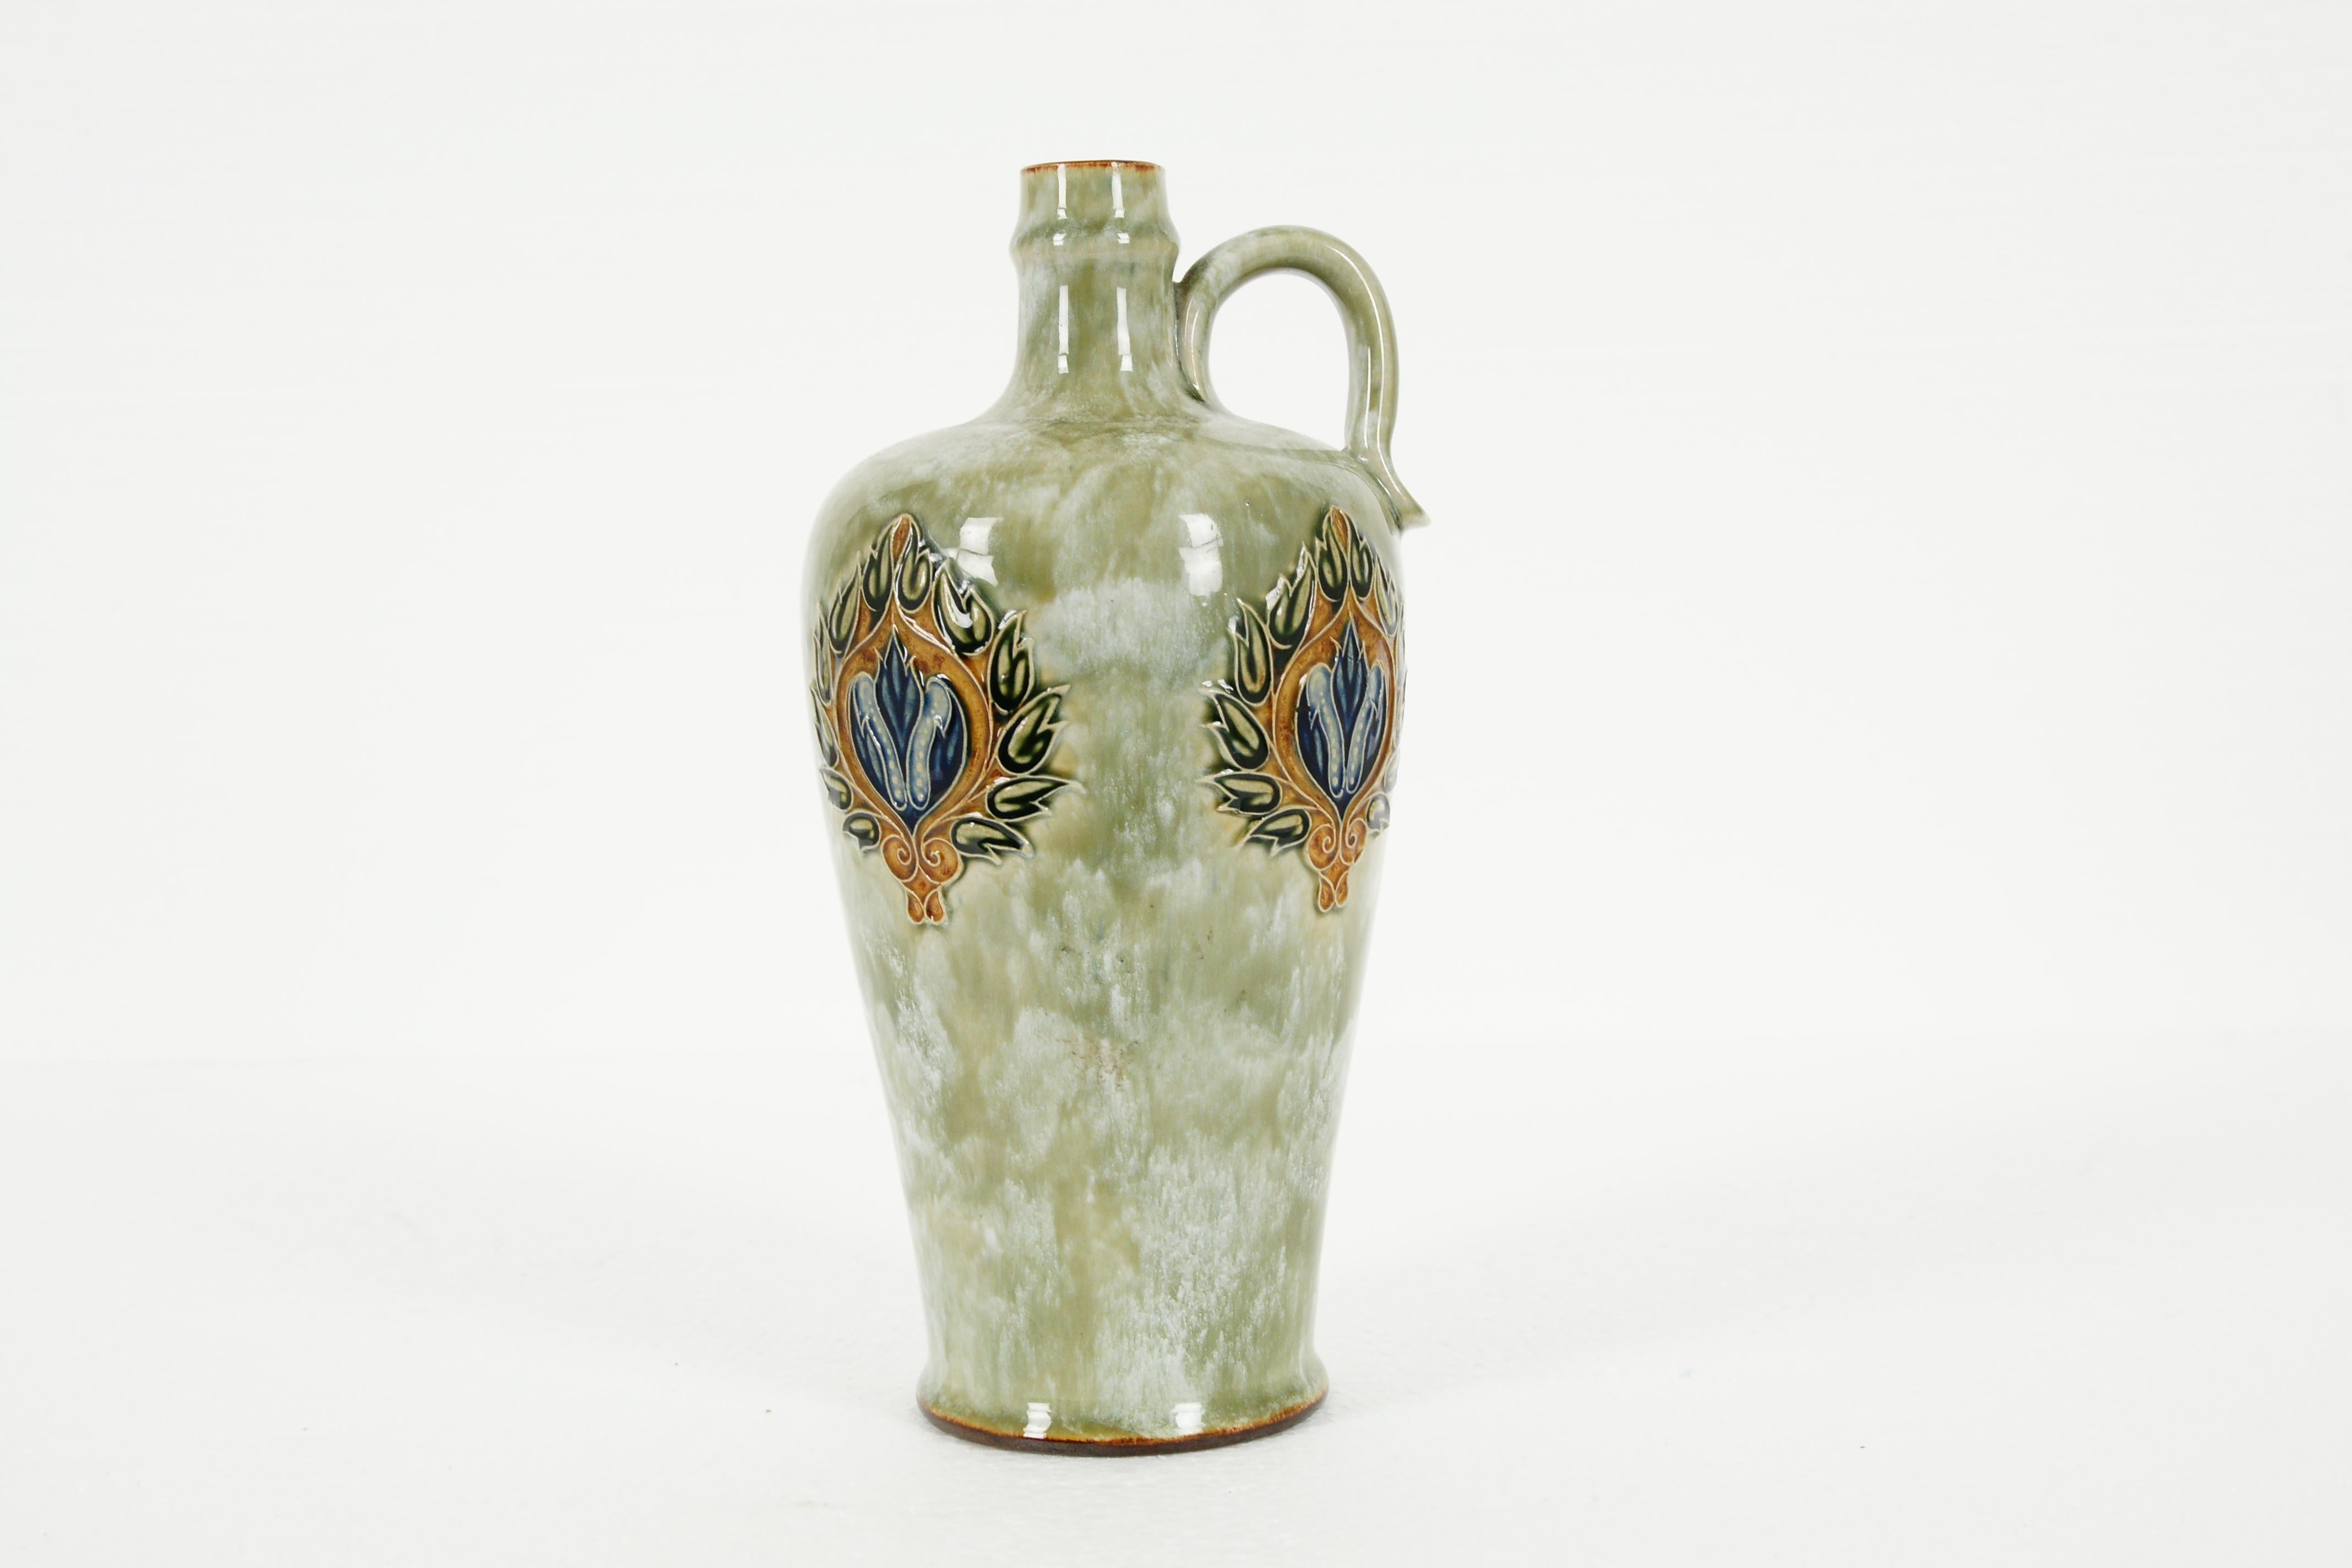 Antique Royal Doulton, whisky bottle, BB7, B143 SKU B1972

Inverse baluster with mottle green glaze
Decorated with Art Nouveau floral design
Timed ridging at the foot
Impressed factory marks
Missing stopper
Excellent condition
BB7,